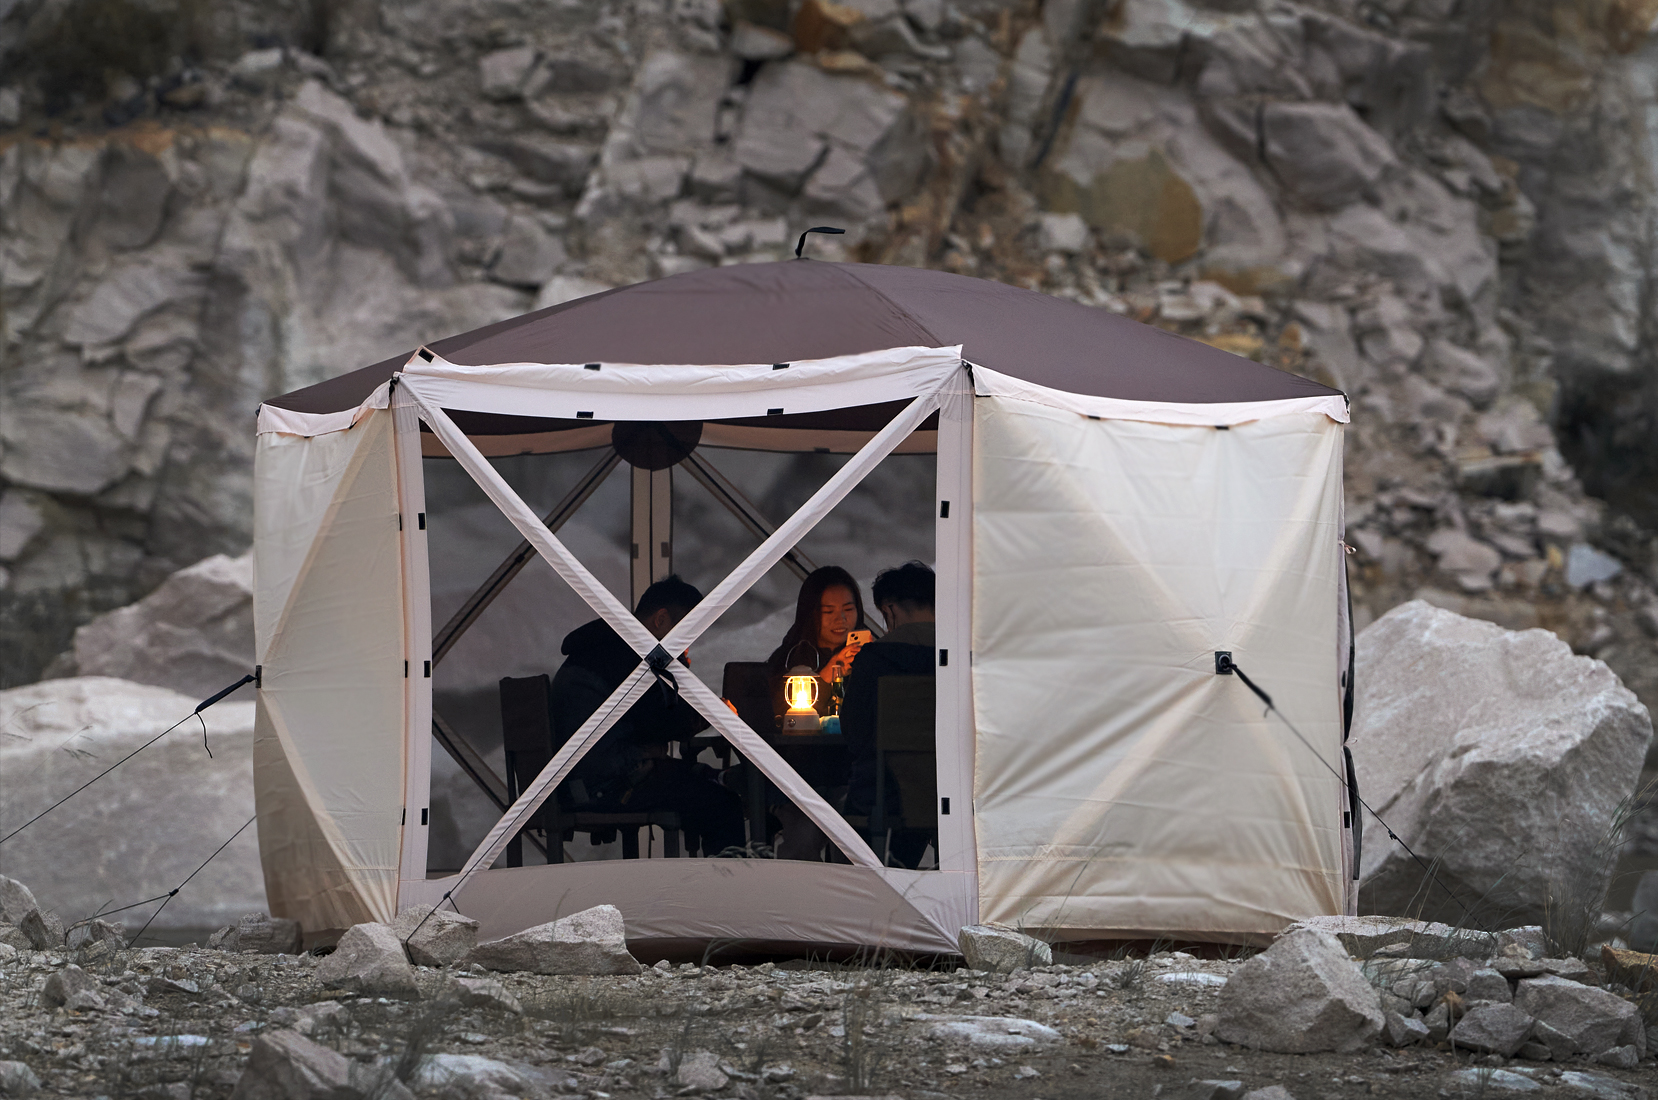 China issued the “Camping Opinions “, and the camping brand accelerated into the fast lane